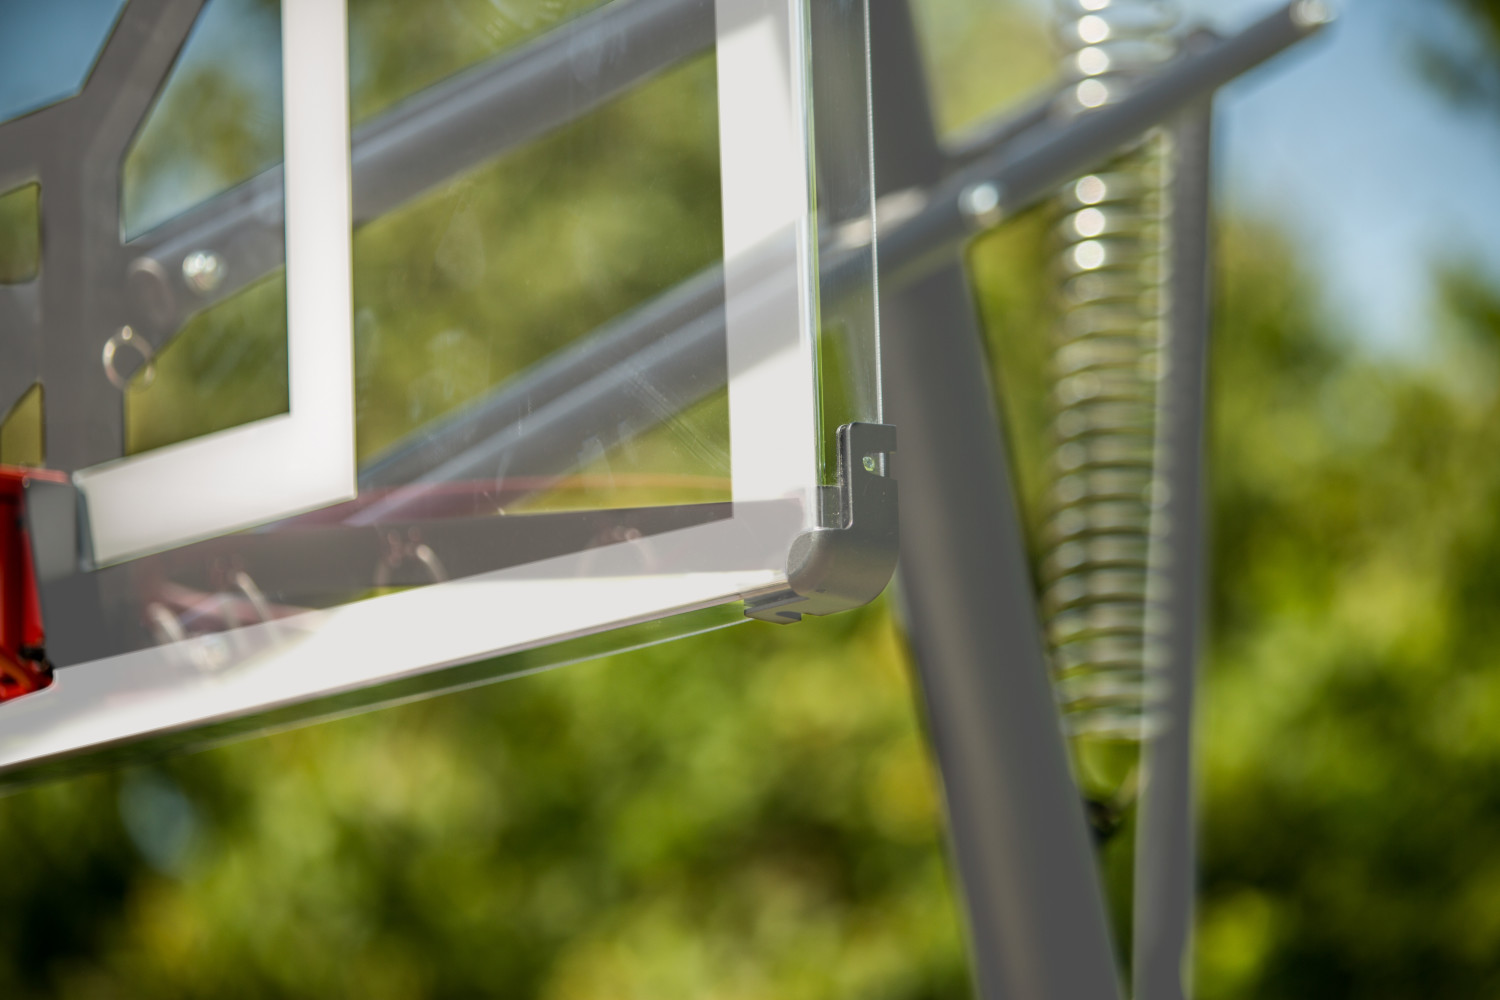 Silverback SBX 54 In. Backboard Portable Basketball Height-Adjustable Hoop System - image 3 of 8